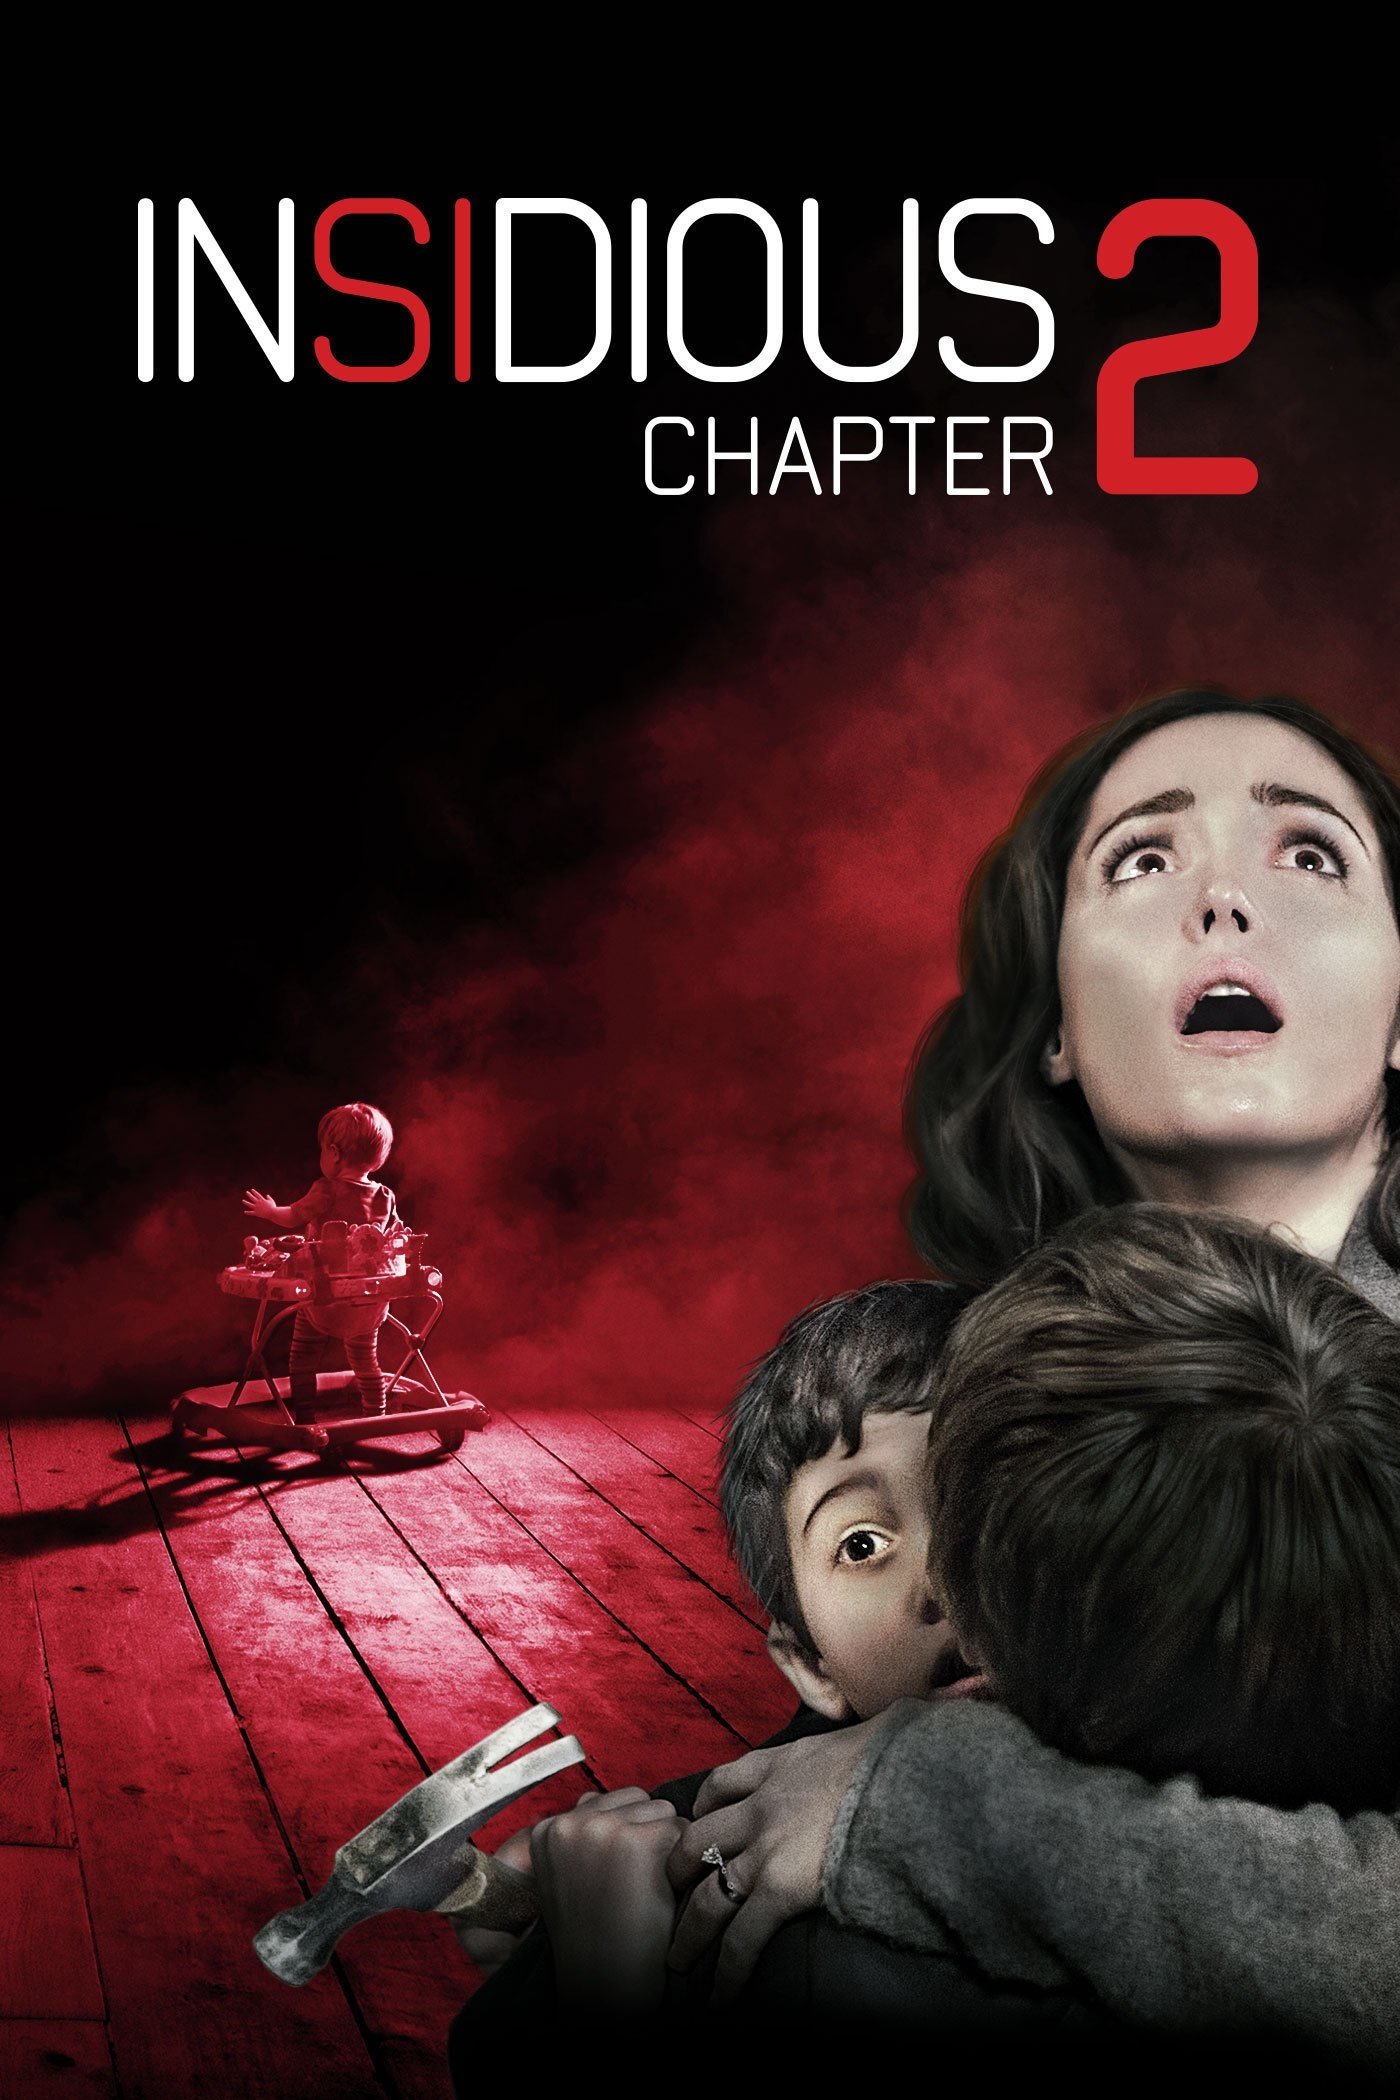 Insidious: Chapter 2 Movie Poster - ID: 147340 - Image Abyss - How To Watch The Insidious Movies In Order